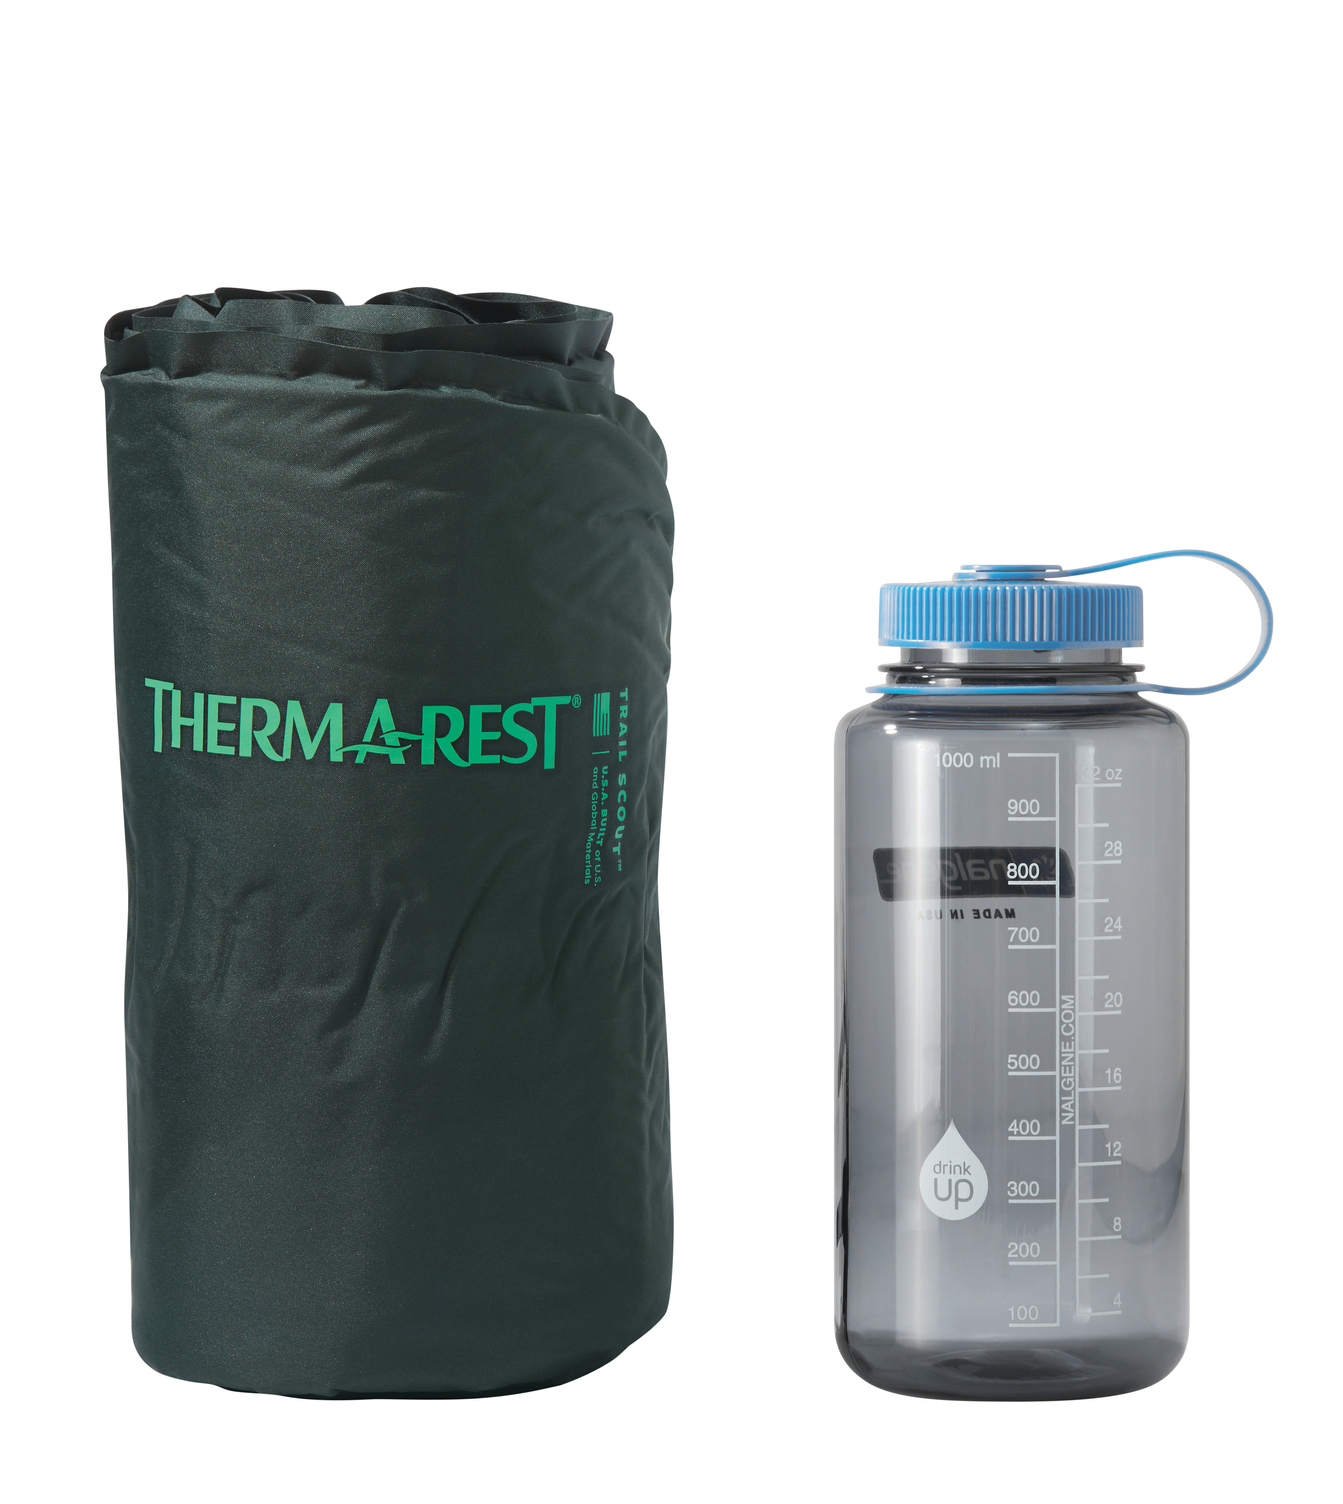 ThermaRest Trail Scout Sleeping Pad